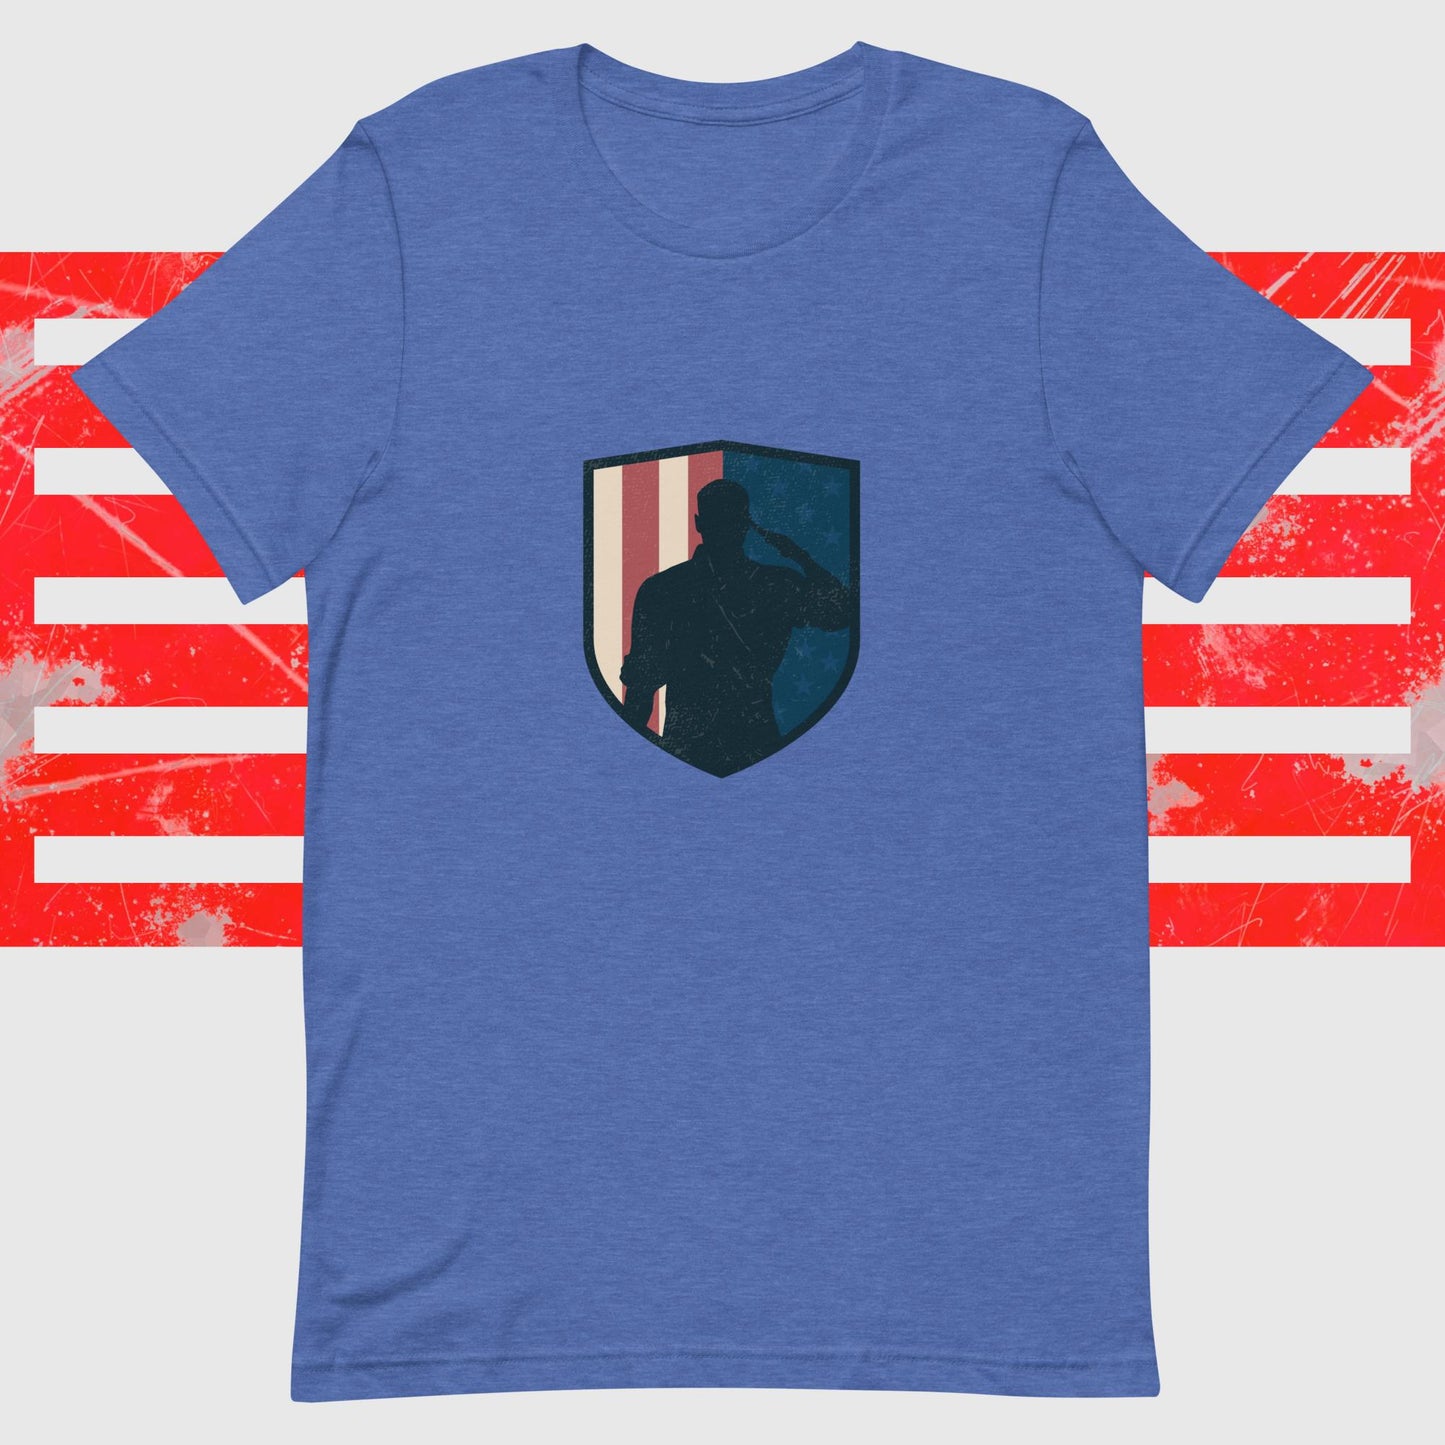 PATRIOTIC T-SHIRT AMERICAN SOLDIER LOGO ROYAL FRONT - www.firstamericanstore.com